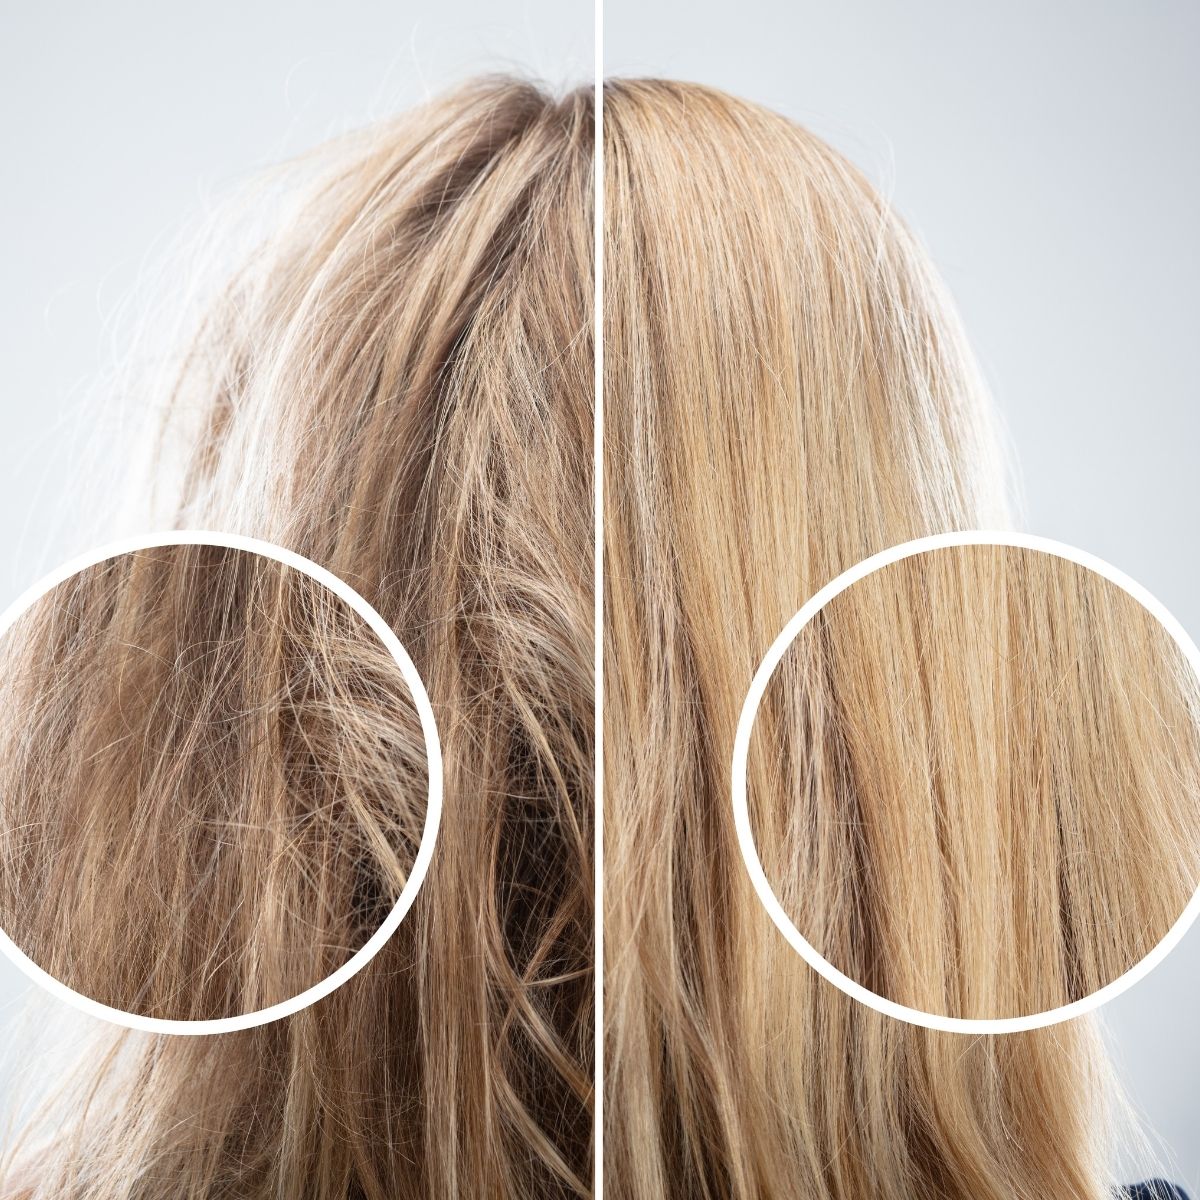 A closeup of damaged hair from regular scissors Vs. healthy hair from haircutting shears